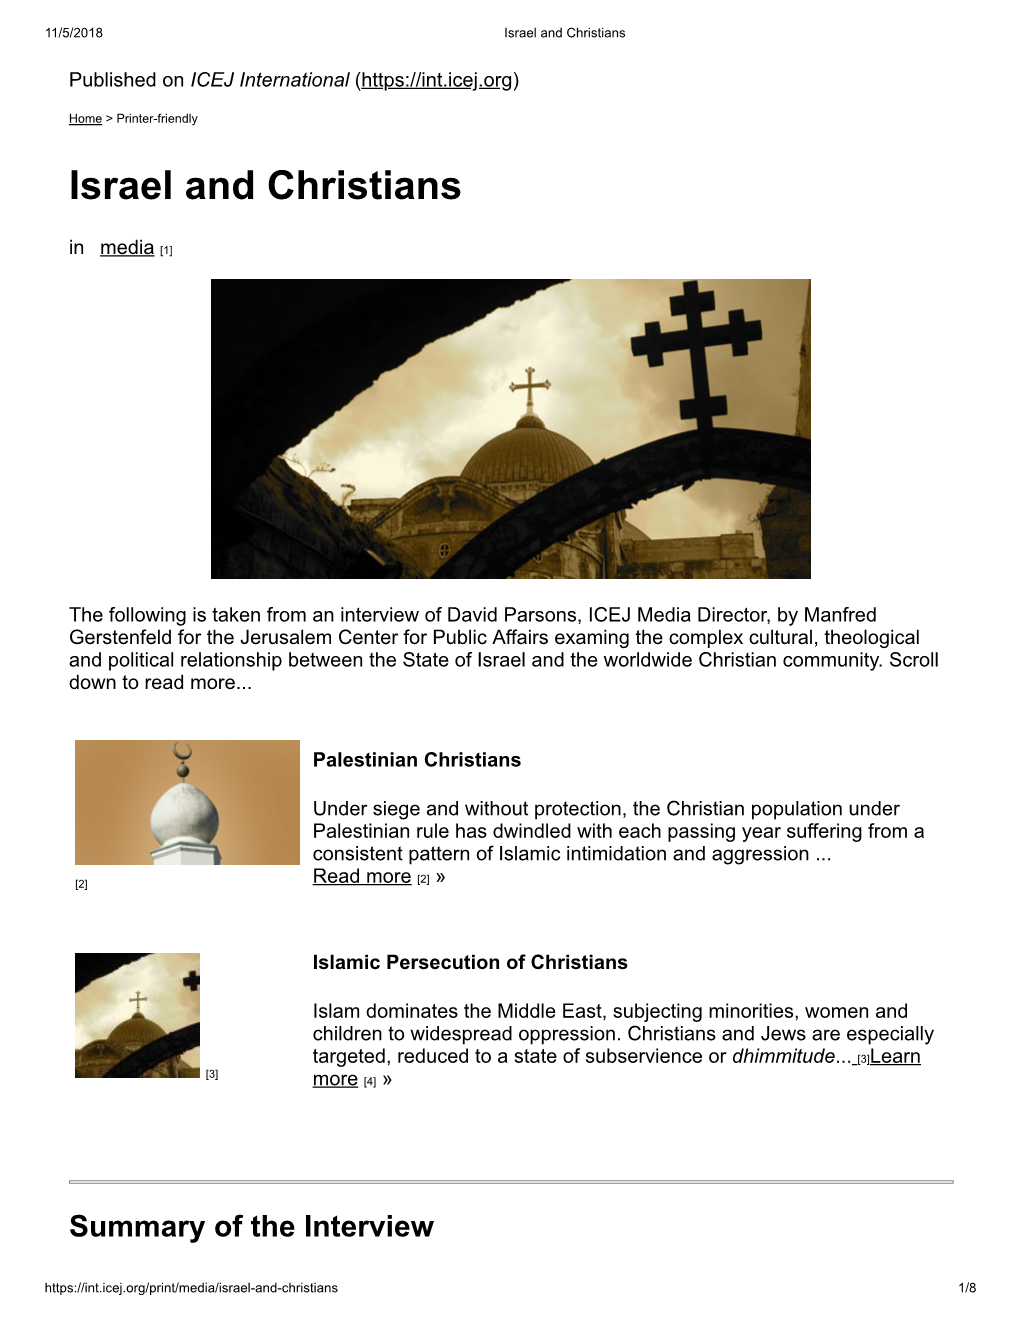 Israel and Christians